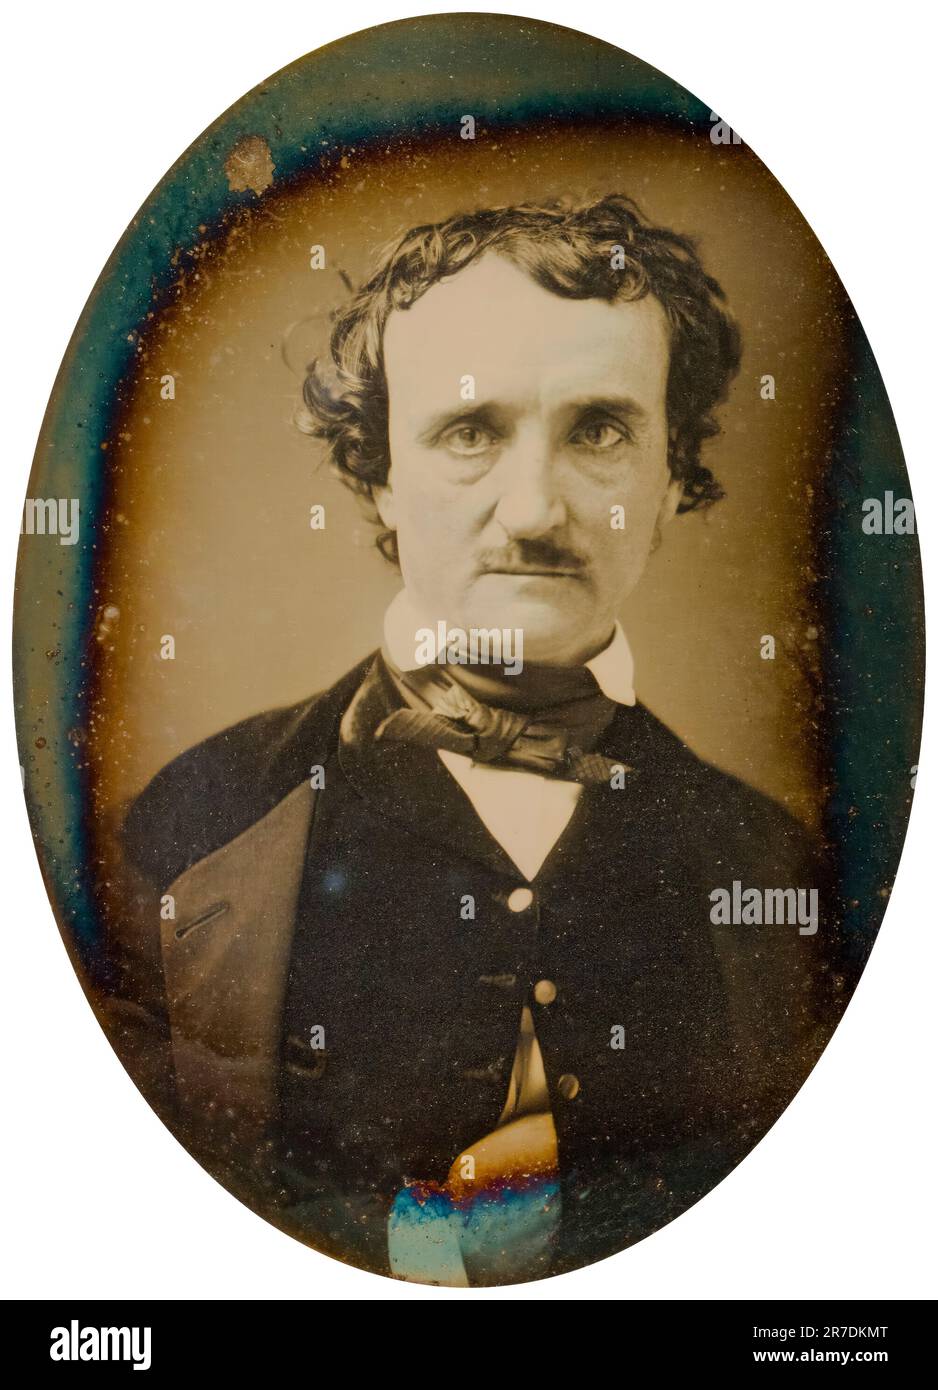 Edgar Allan Poe (1809-1849), American writer and poet, portrait photograph Daguerreotype by unknown American photographer, 1849 Stock Photo